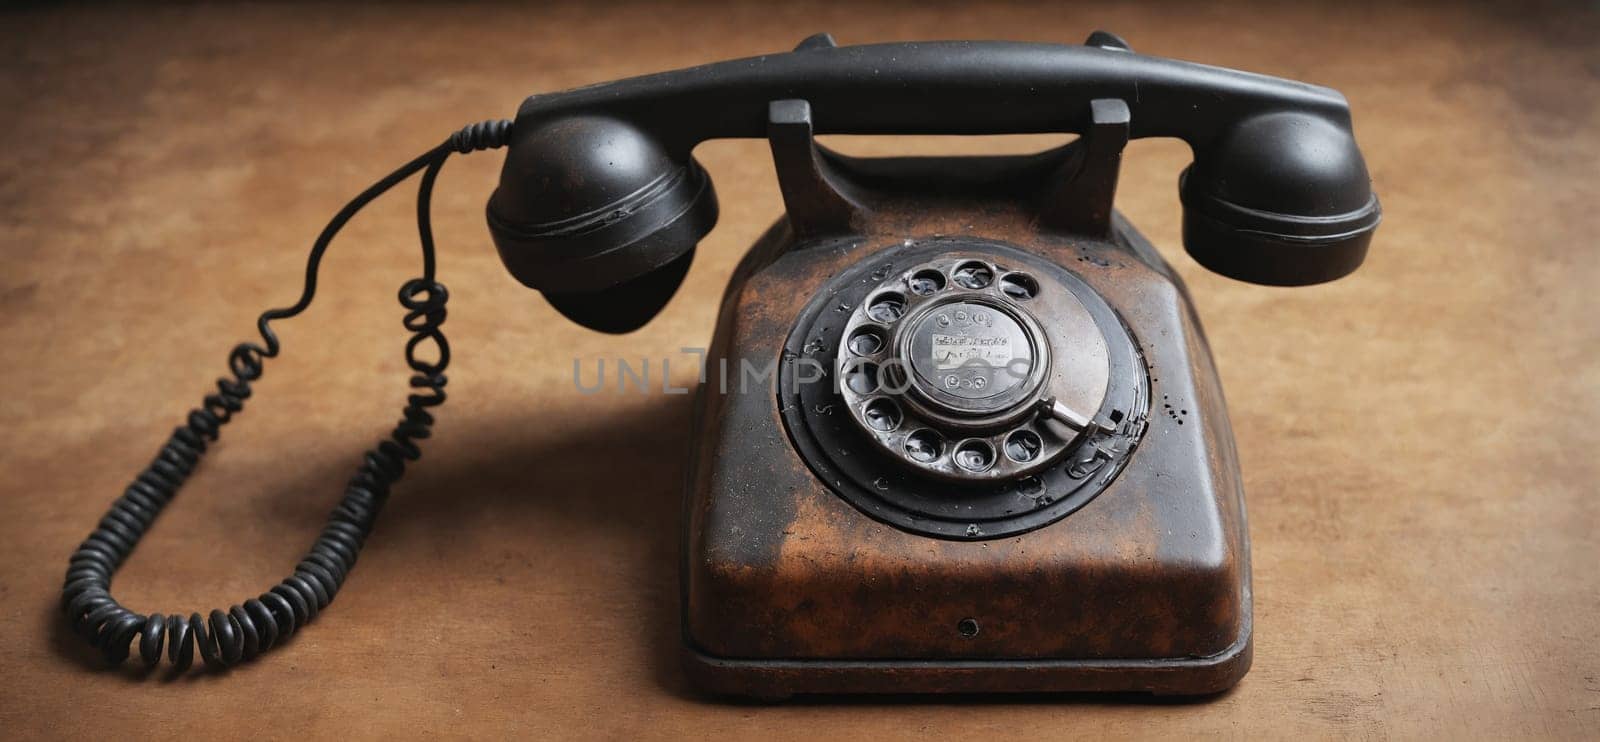 A nostalgic moment frozen in time with a classic brown rotary phone resting on a wooden surface.